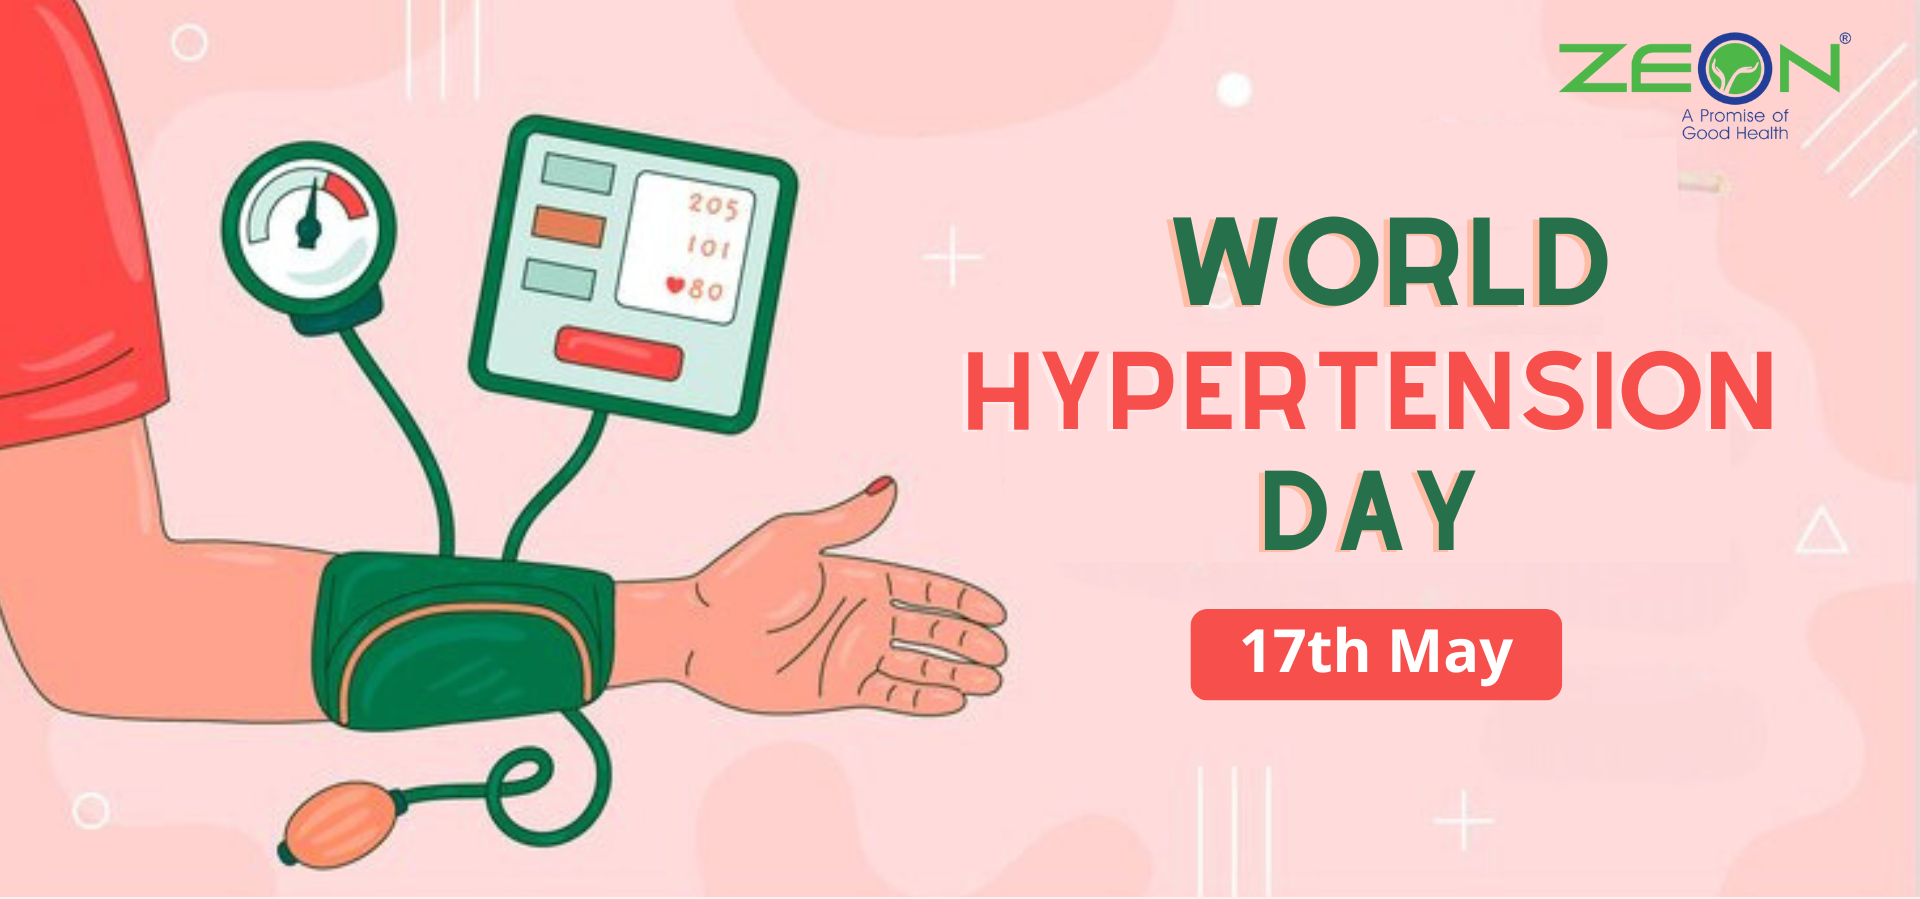 Is Your Blood Pressure Under Control? Taking Action on World Hypertension Day